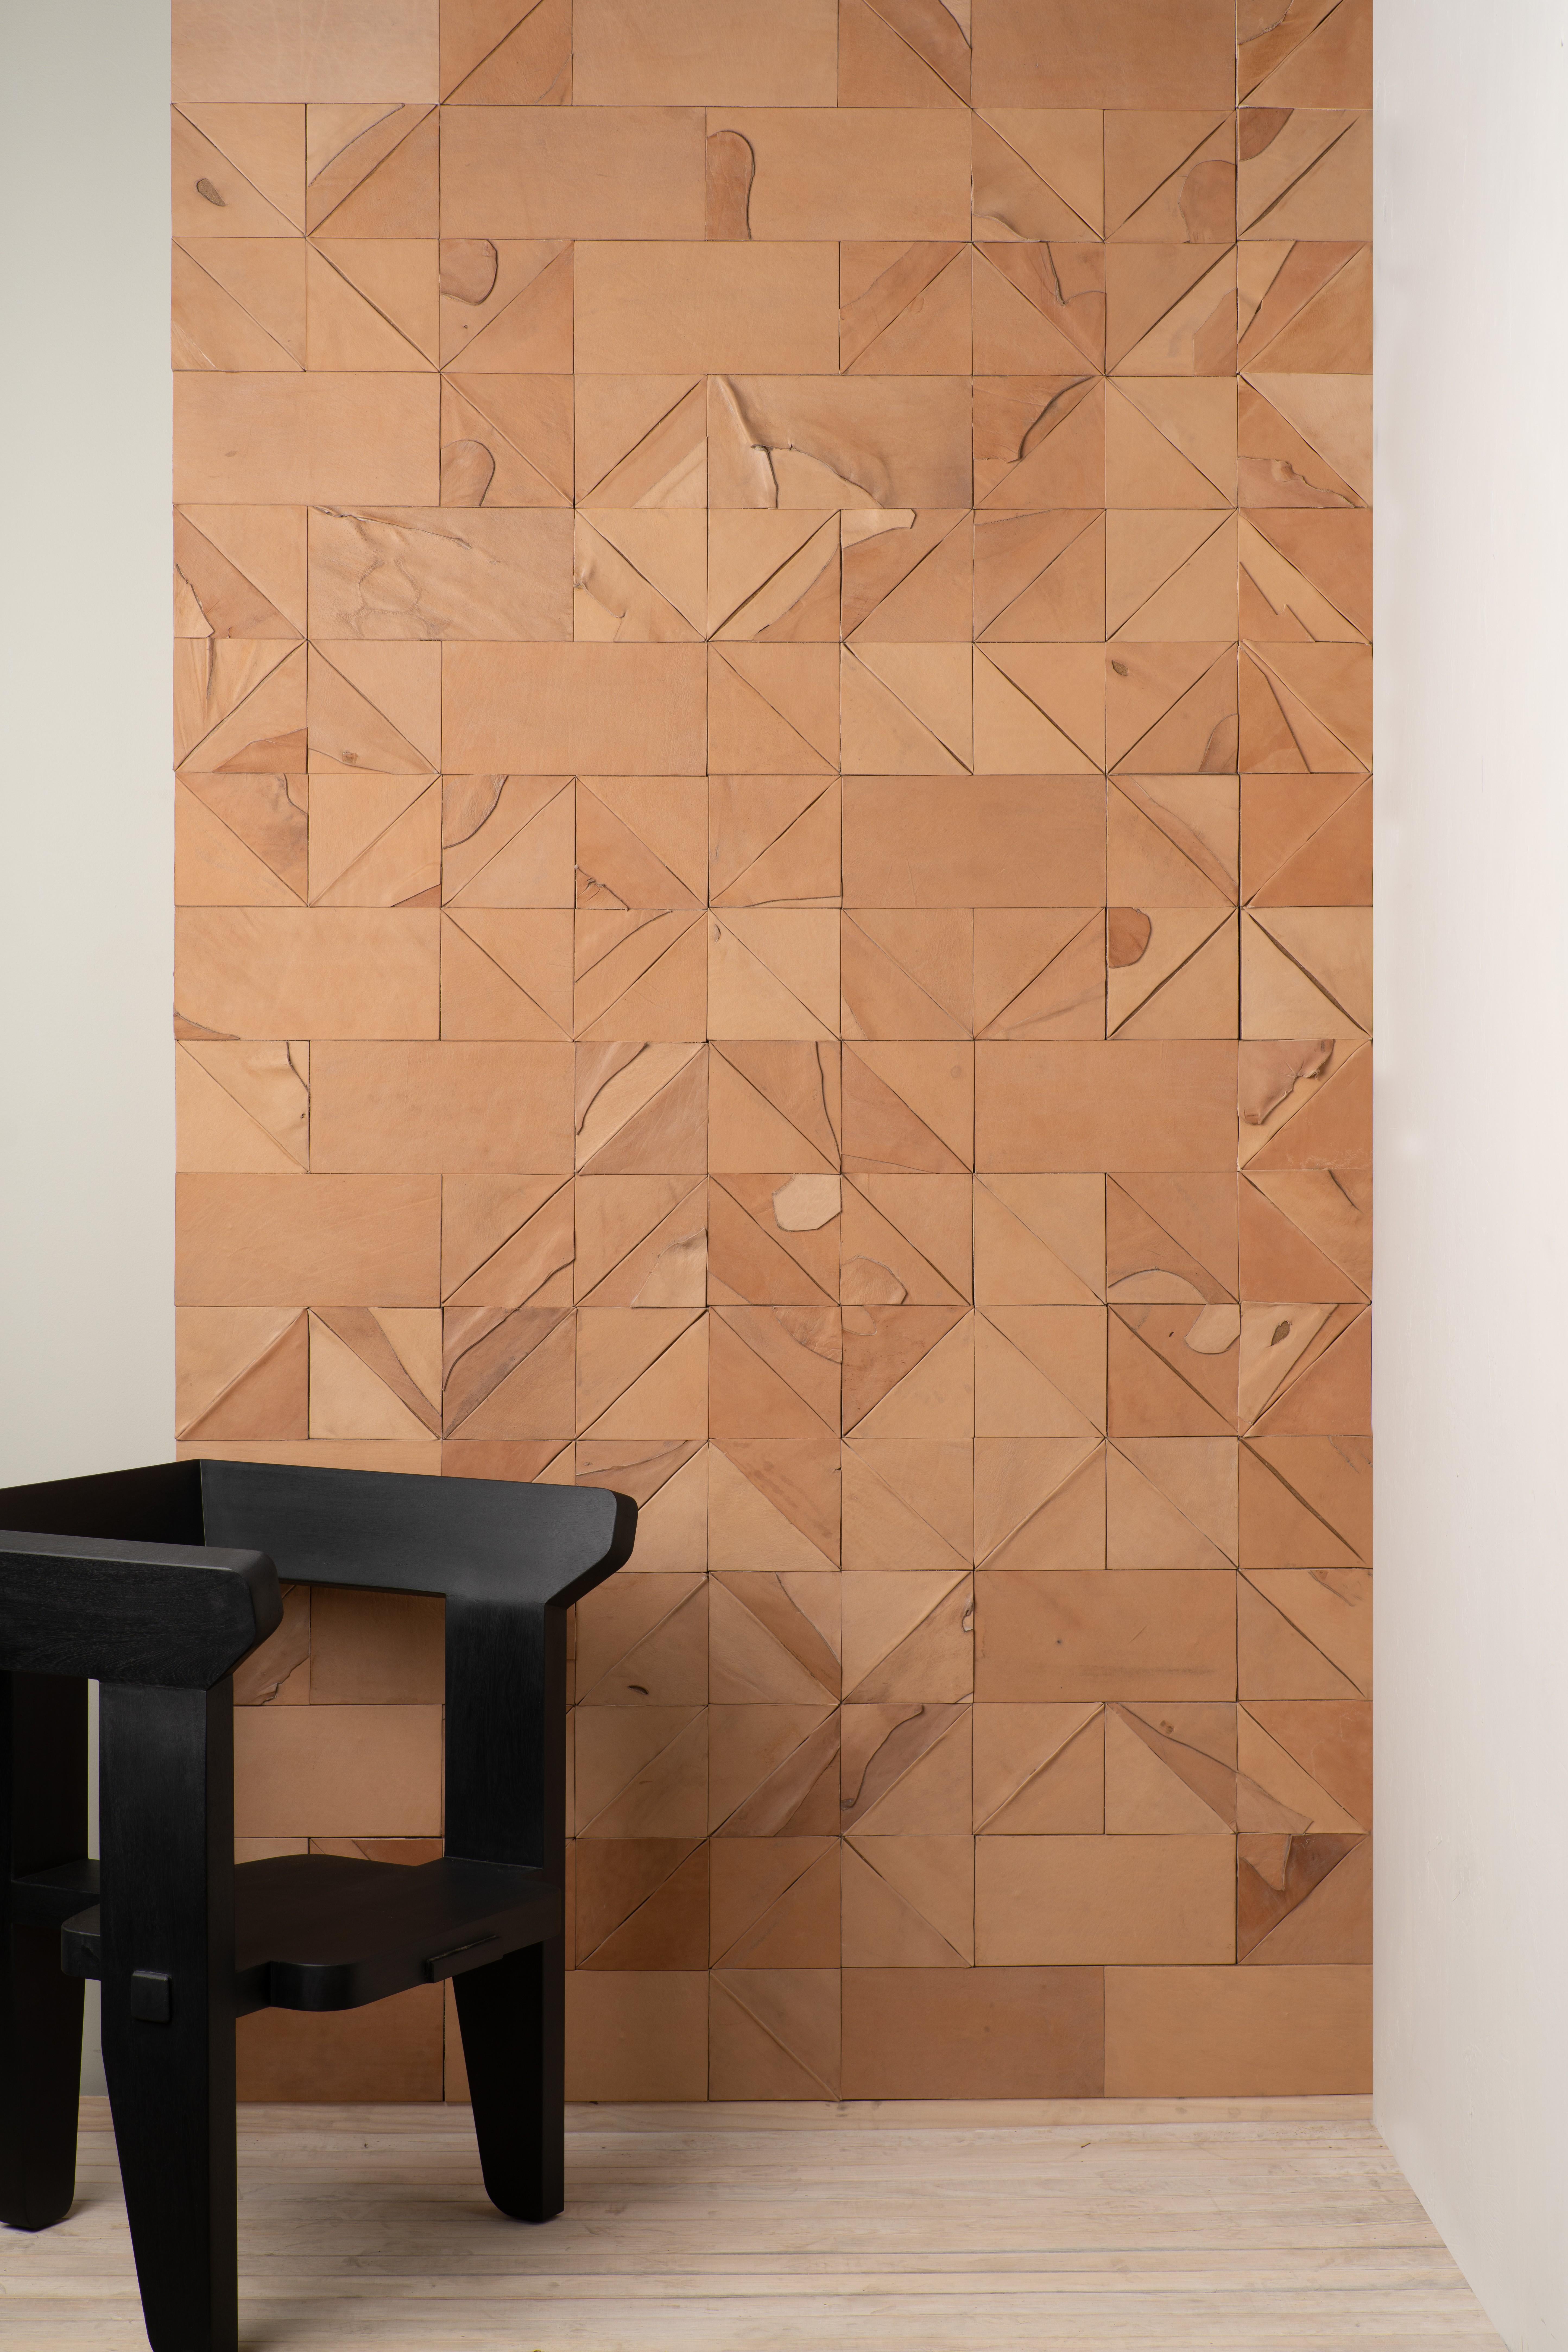 These NATURAL LEATHER collage tiles are made in modular sizes and SOLD BY THE SQUARE FOOT, NOT PER TILE. The tiles can be hung on any wall surface and in any configuration. Each panel is composed randomly and therefore, no two panels are alike. They